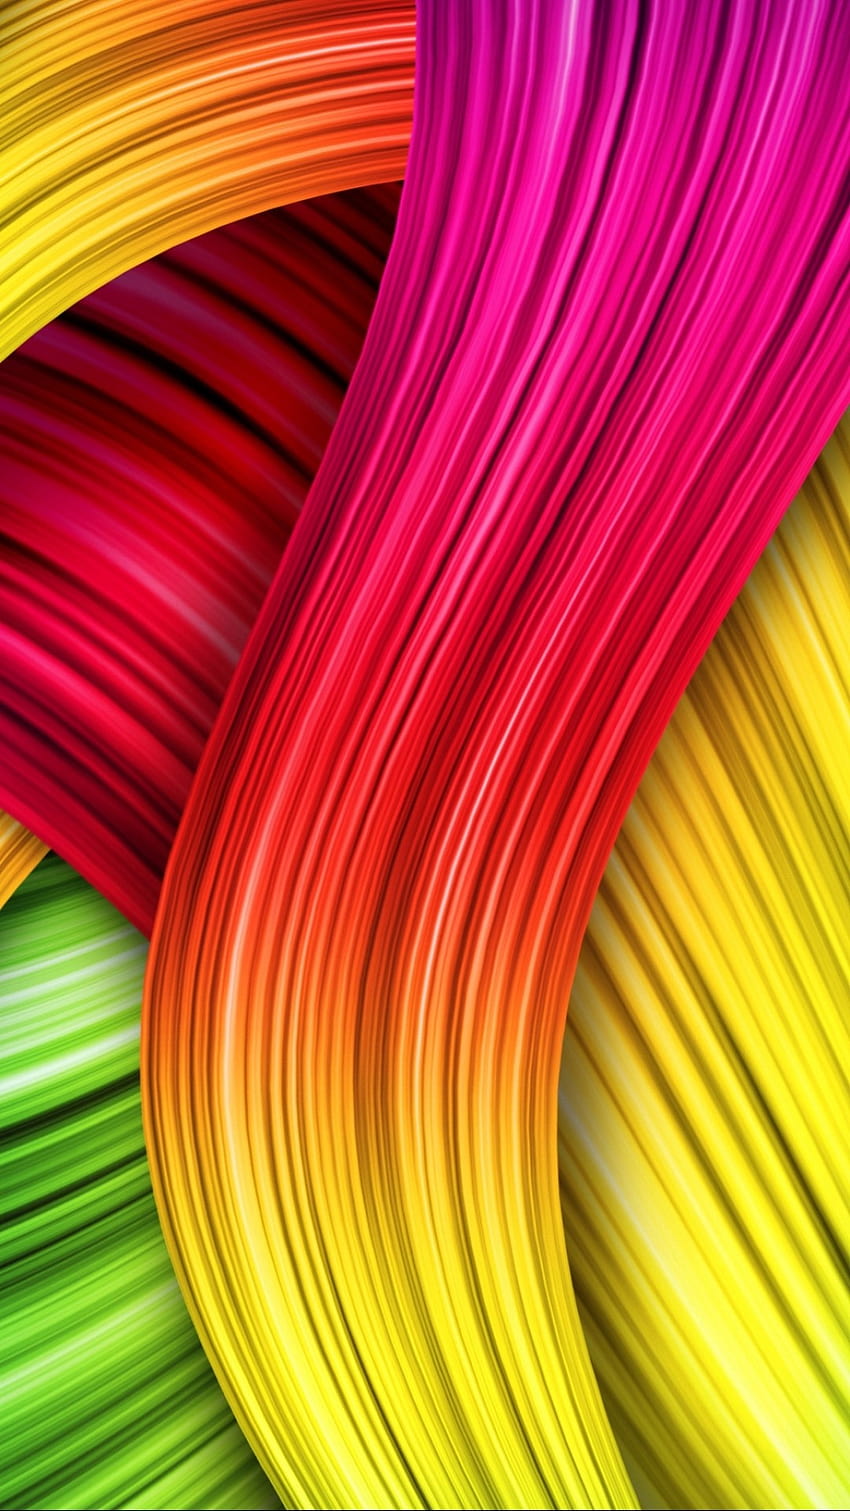 Colorful Abstract For Iphone New Mobile, mixed colorful HD phone wallpaper